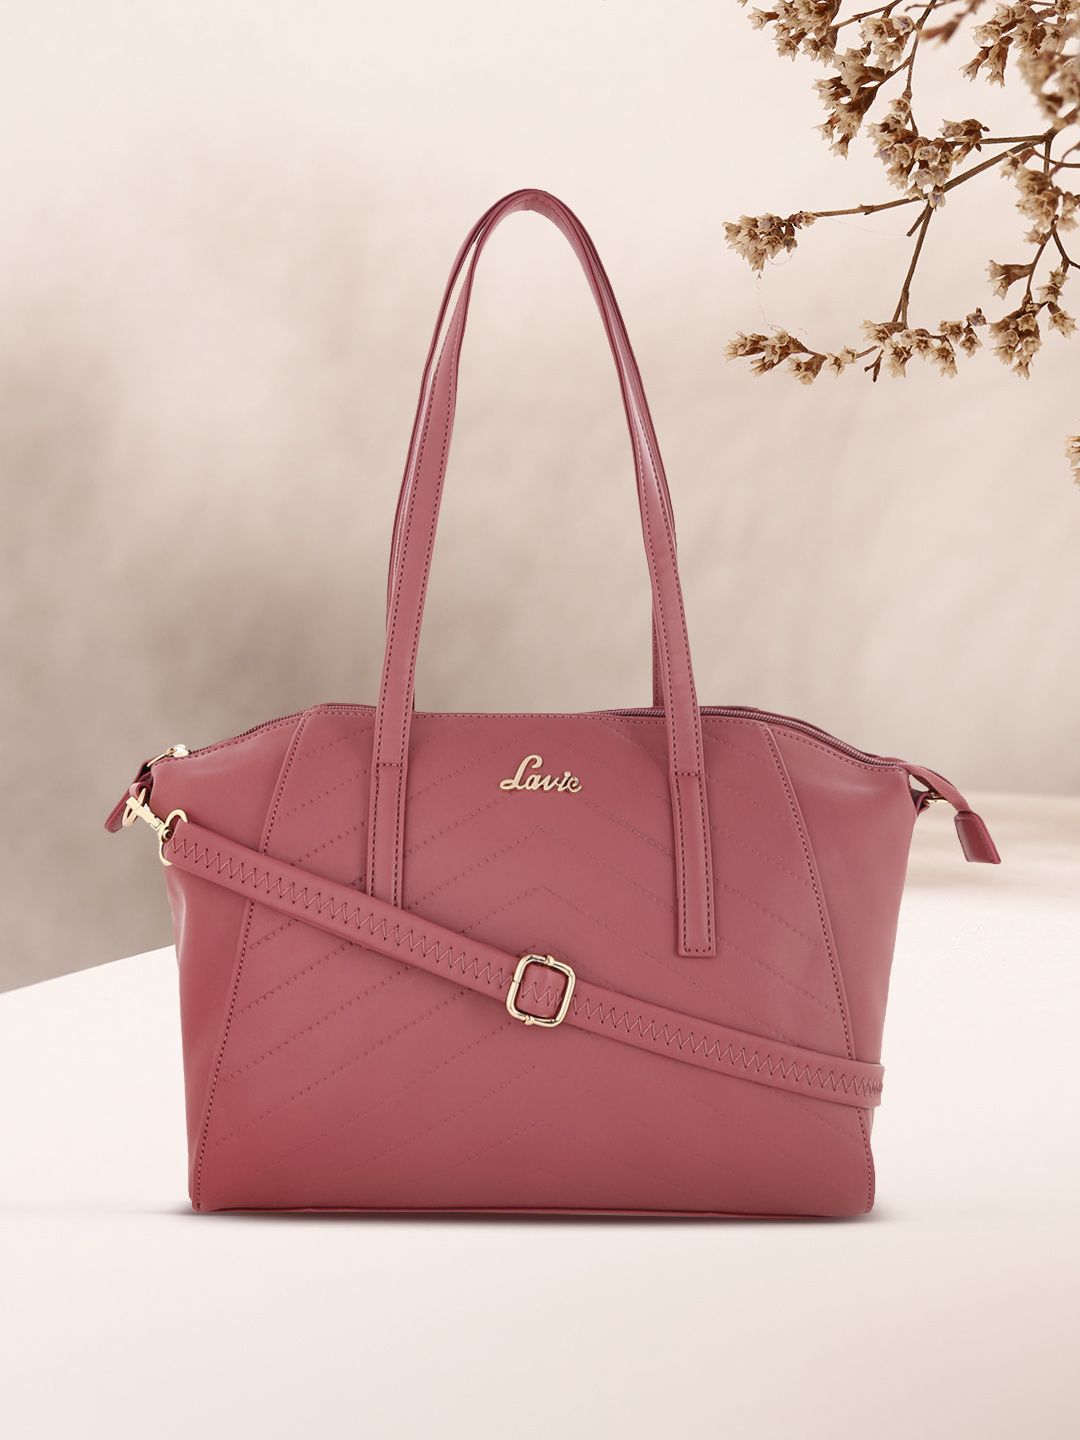 Lavie Dusty Pink Textured Structured Shoulder Bag with Detachable Sling Strap Price in India